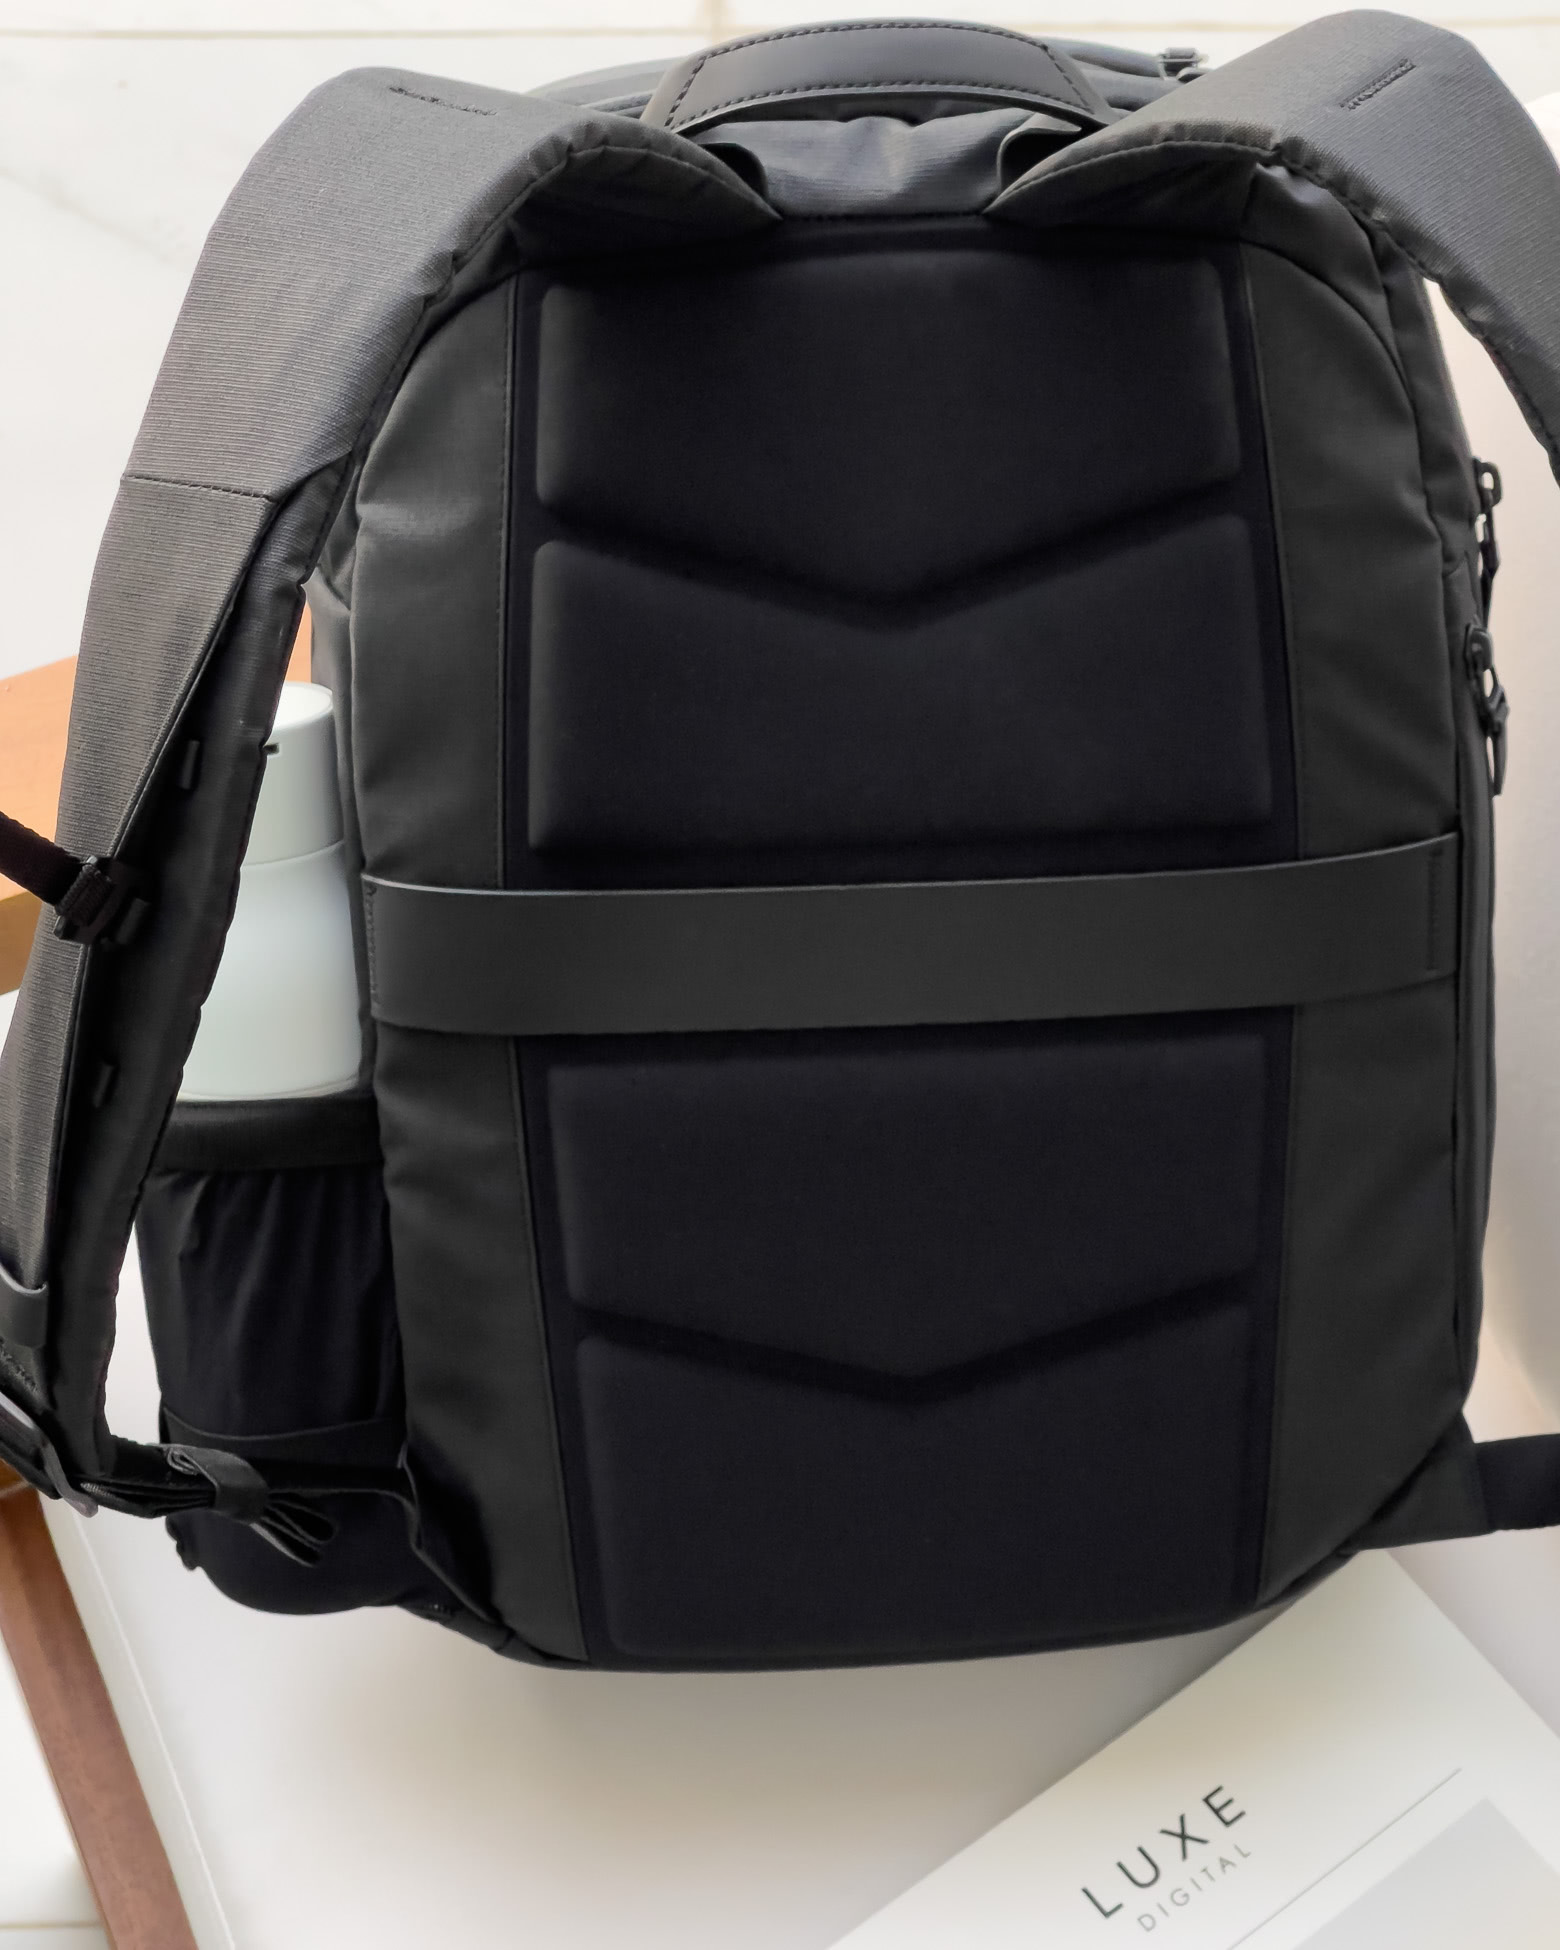 Vincero Commuter Backpack Review: Sustainable & Practical